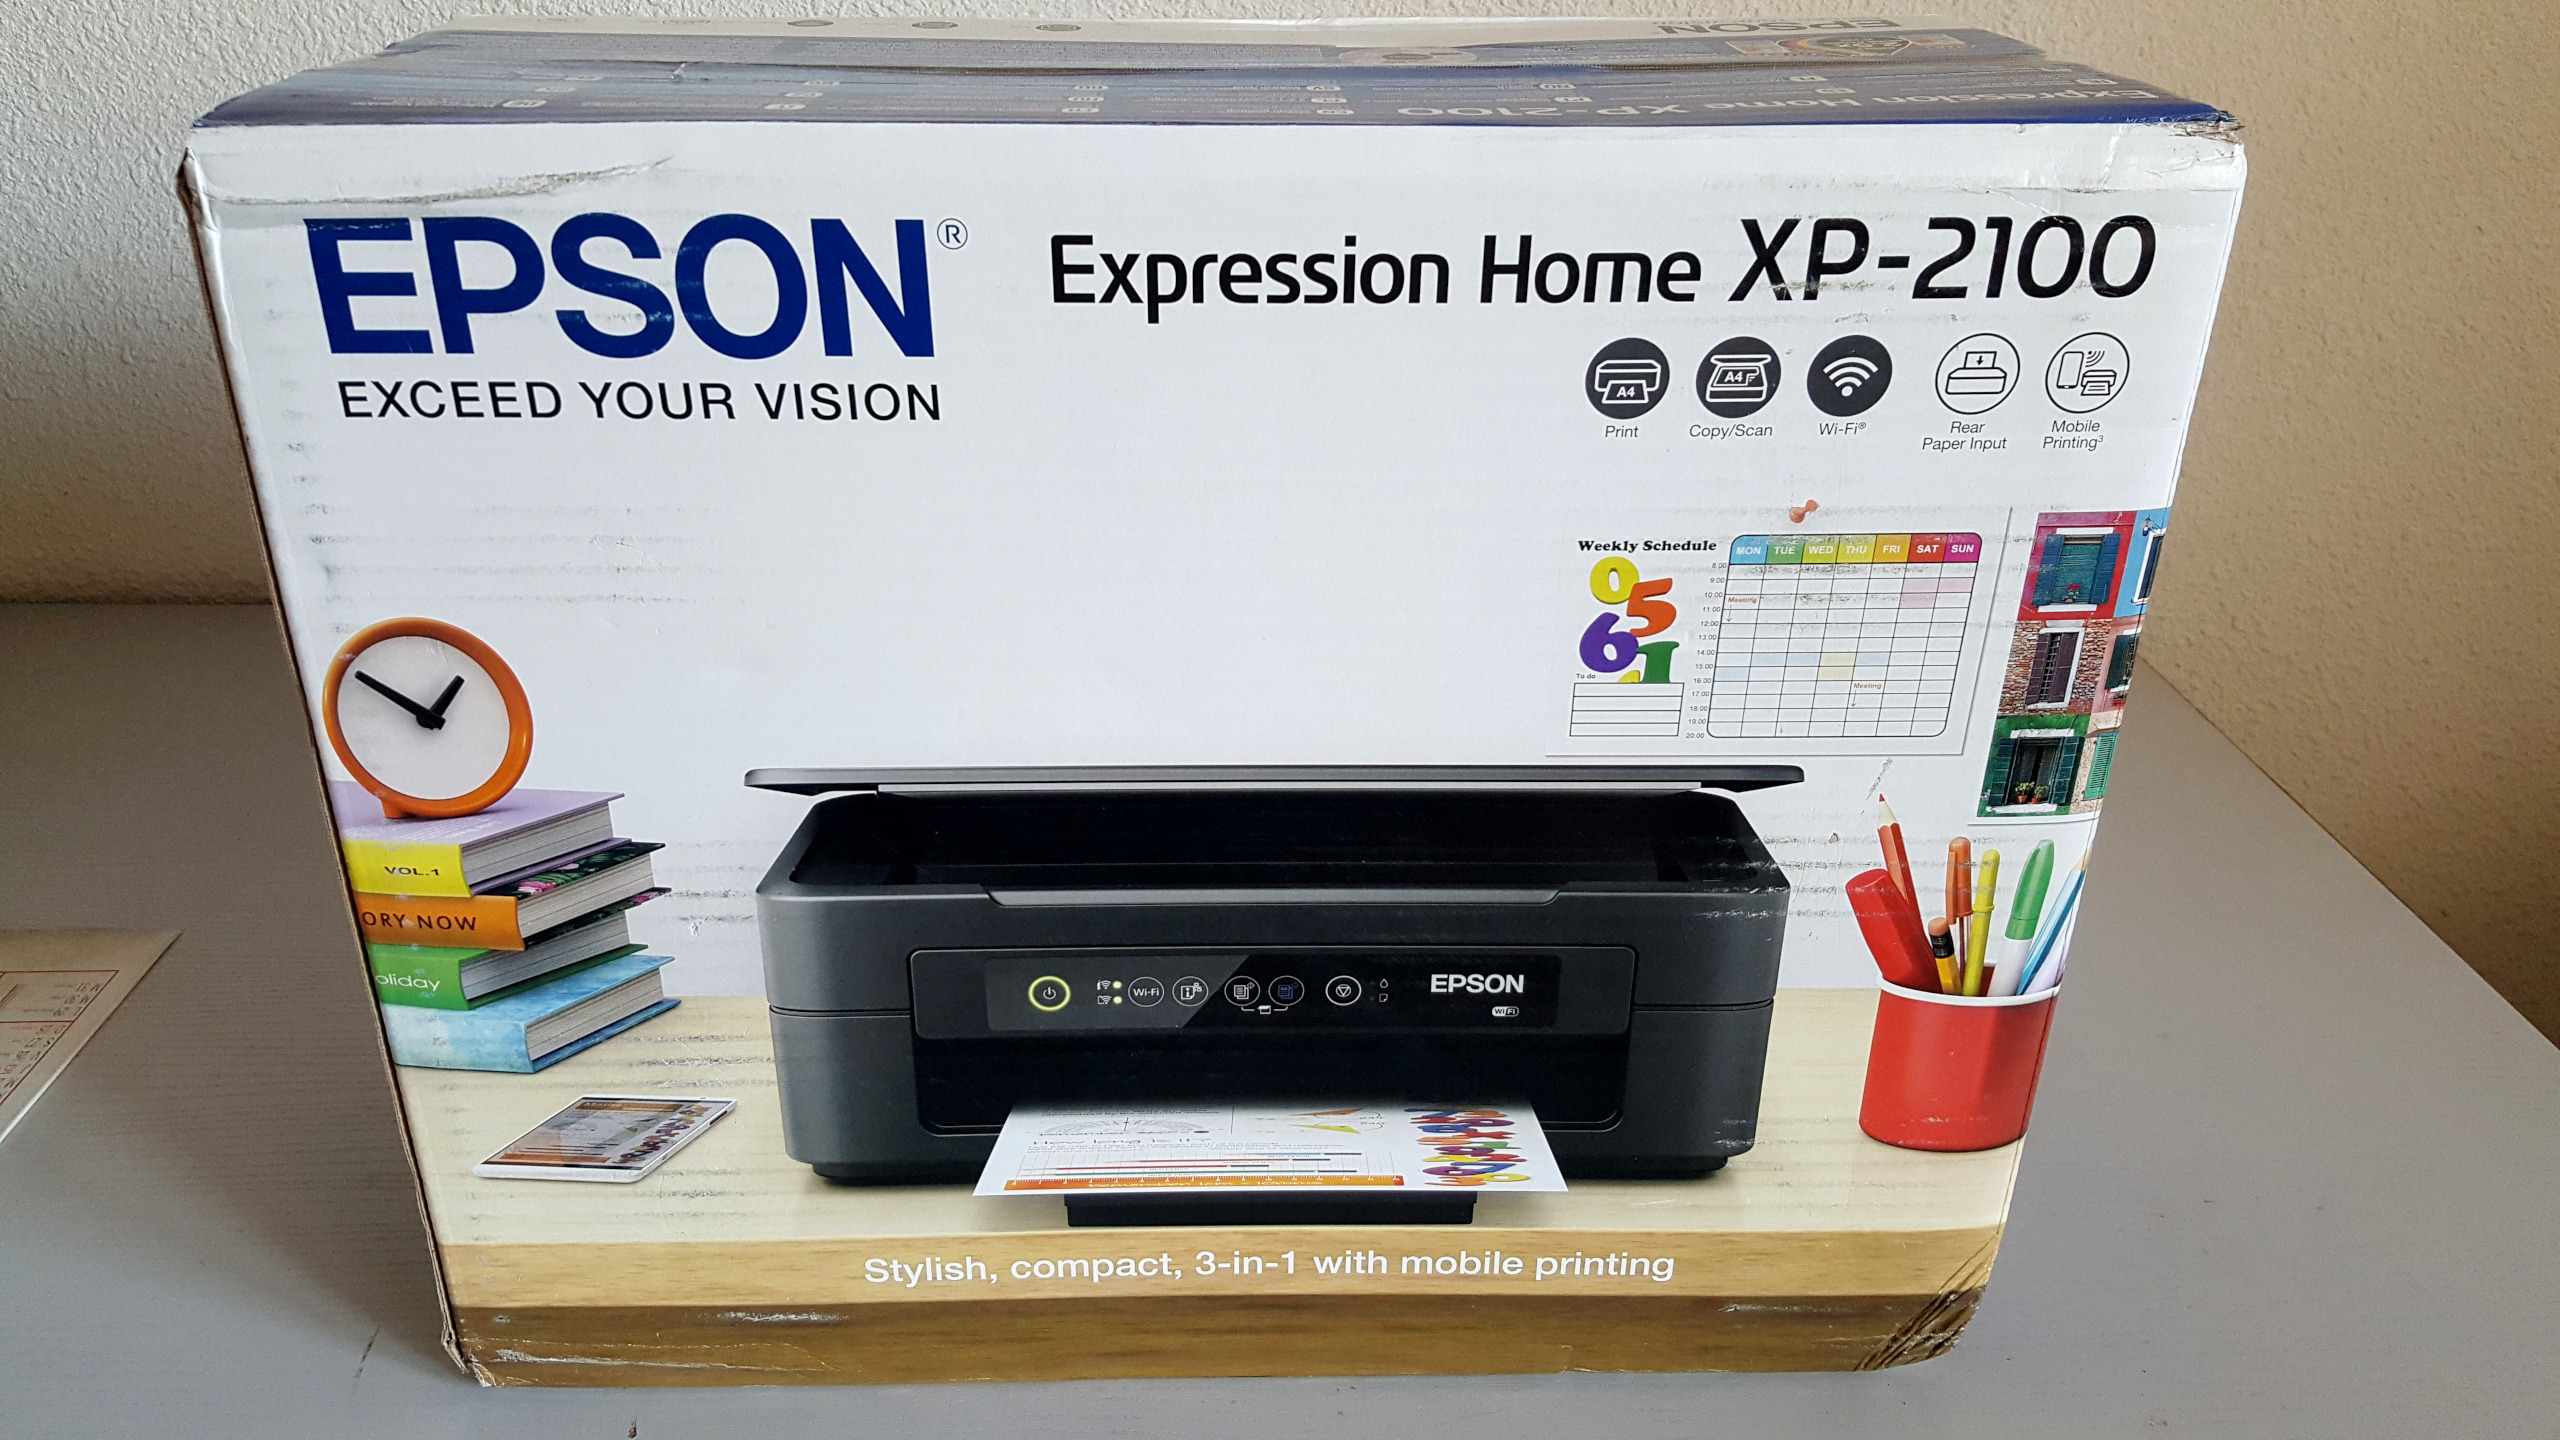 https://www.sun-valley-systems.fr/wp-content/uploads/2020/11/epson-expression-home-xp-2100.jpg